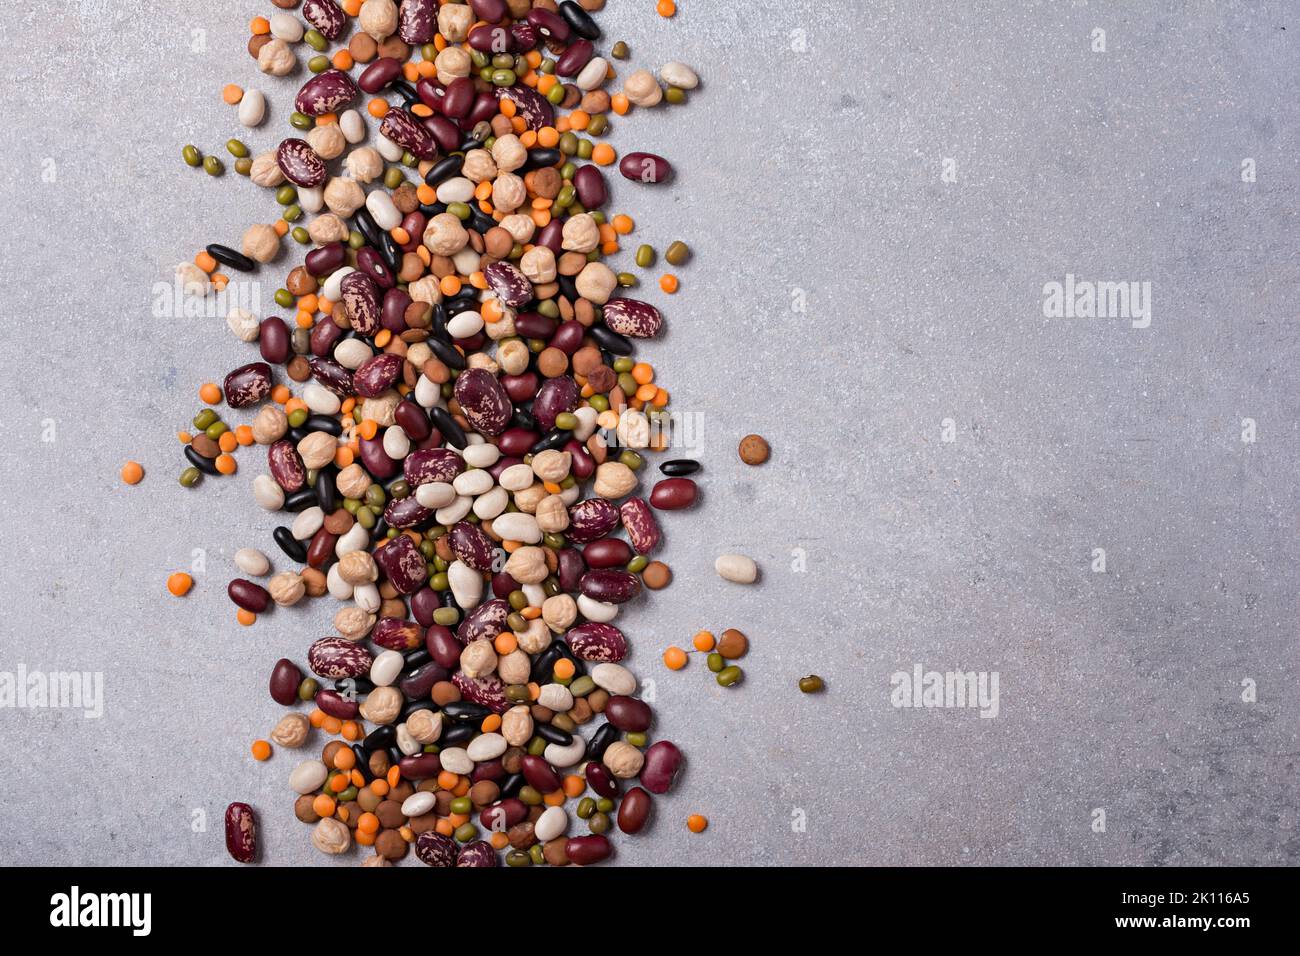 Top view of different beans, lentils, mung or maash and chickpeas on grey concrete background Stock Photo